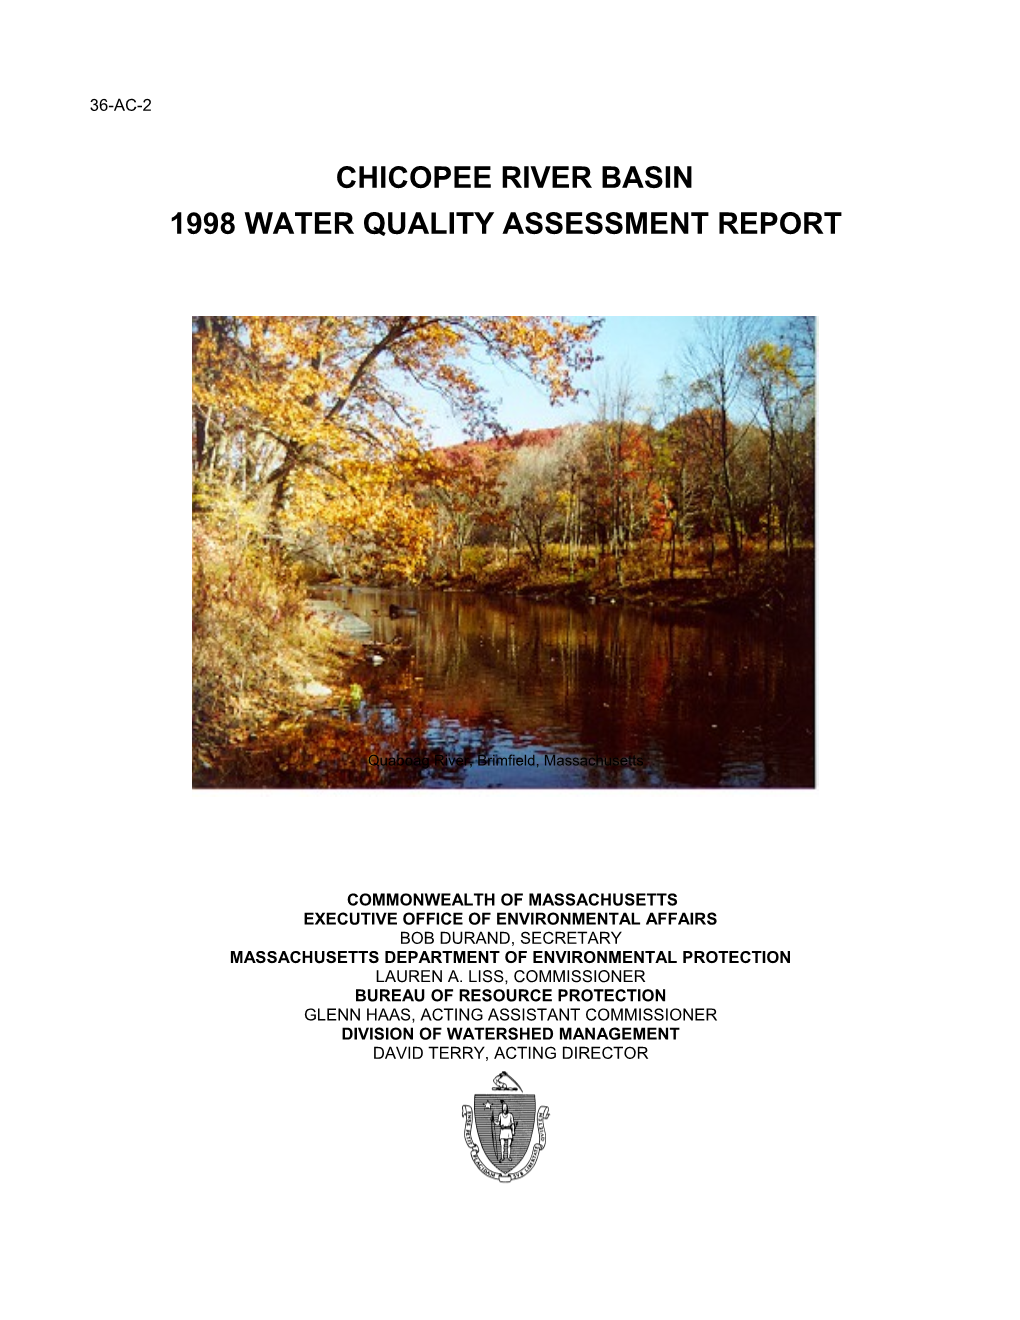 1998 Water Quality Assessment Report